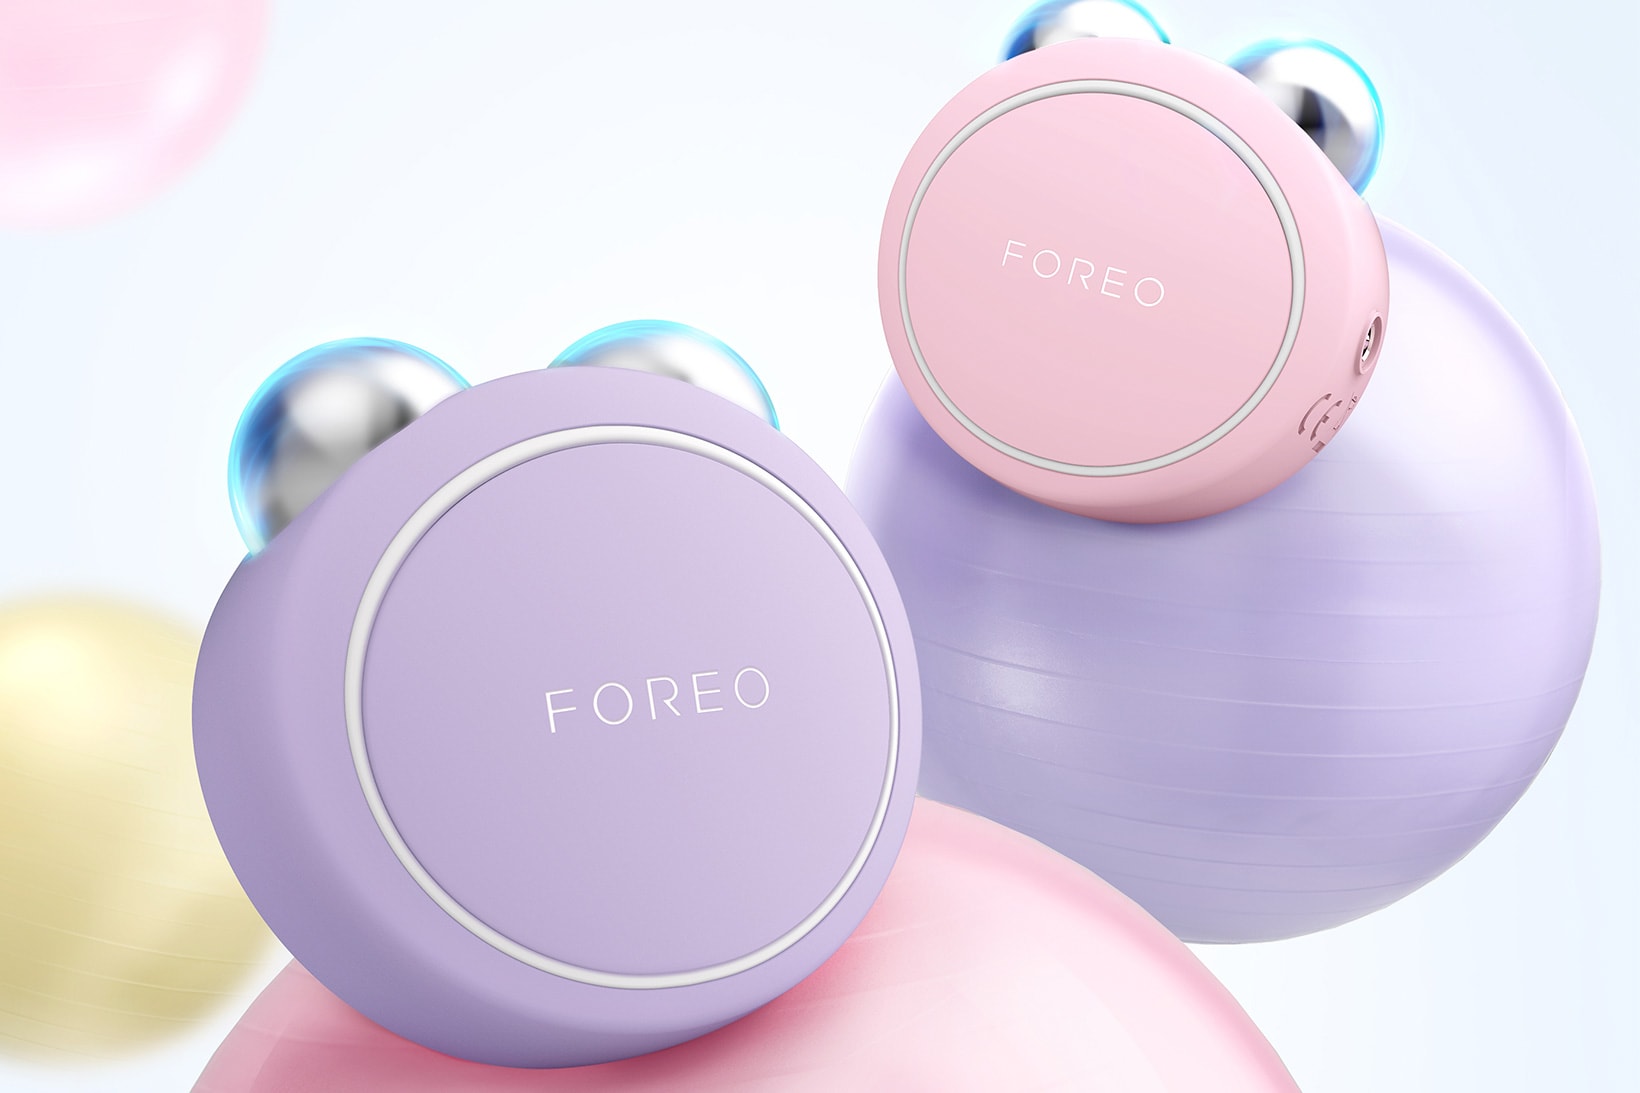 foreo bear mini facial toning microcurrent massager pearl pink lavender skincare devices release price